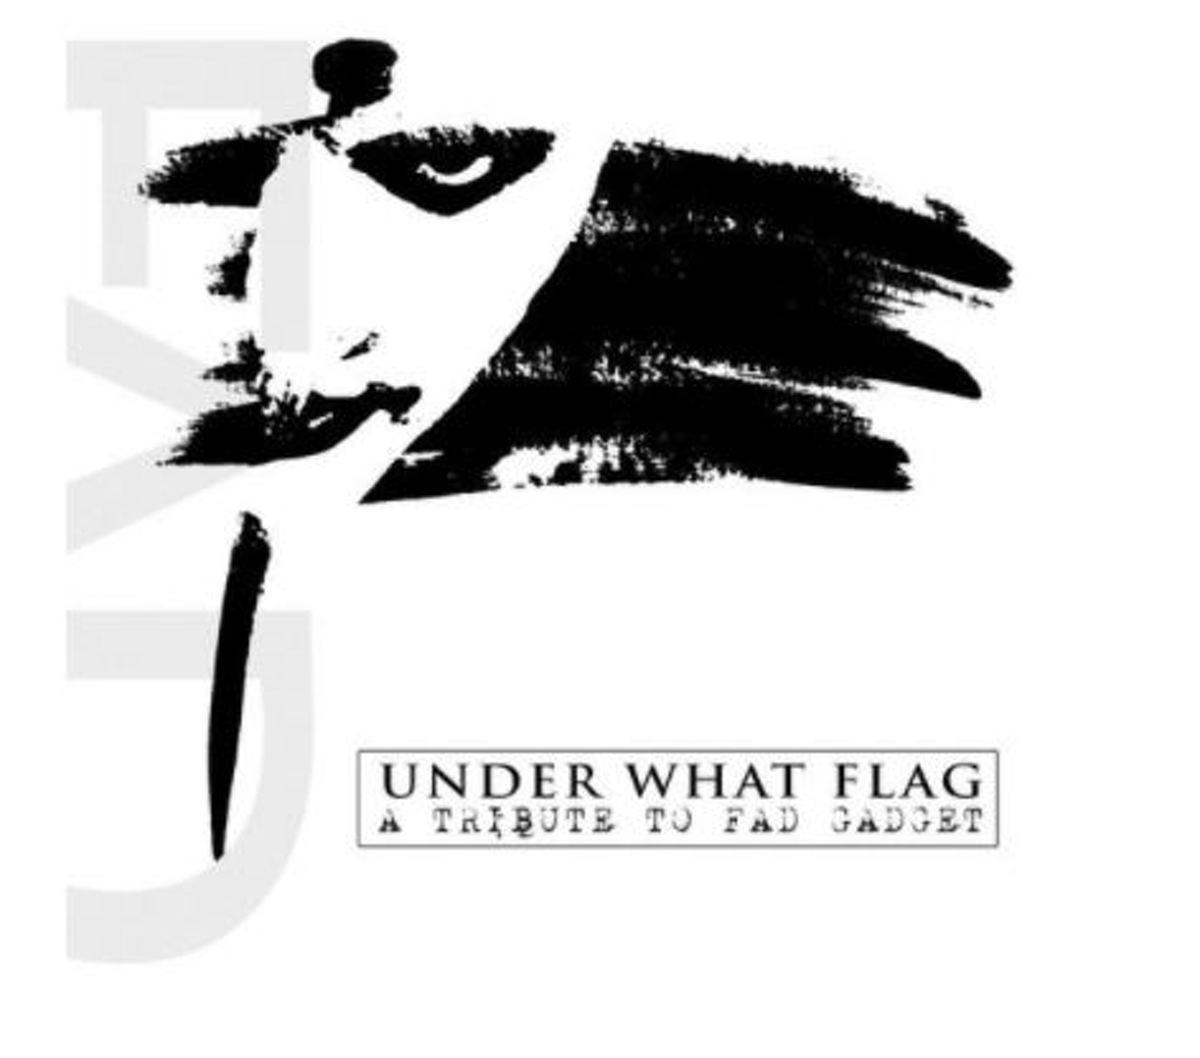 To - - Fad Tribute Under Gadget Flag-A (CD) VARIOUS What